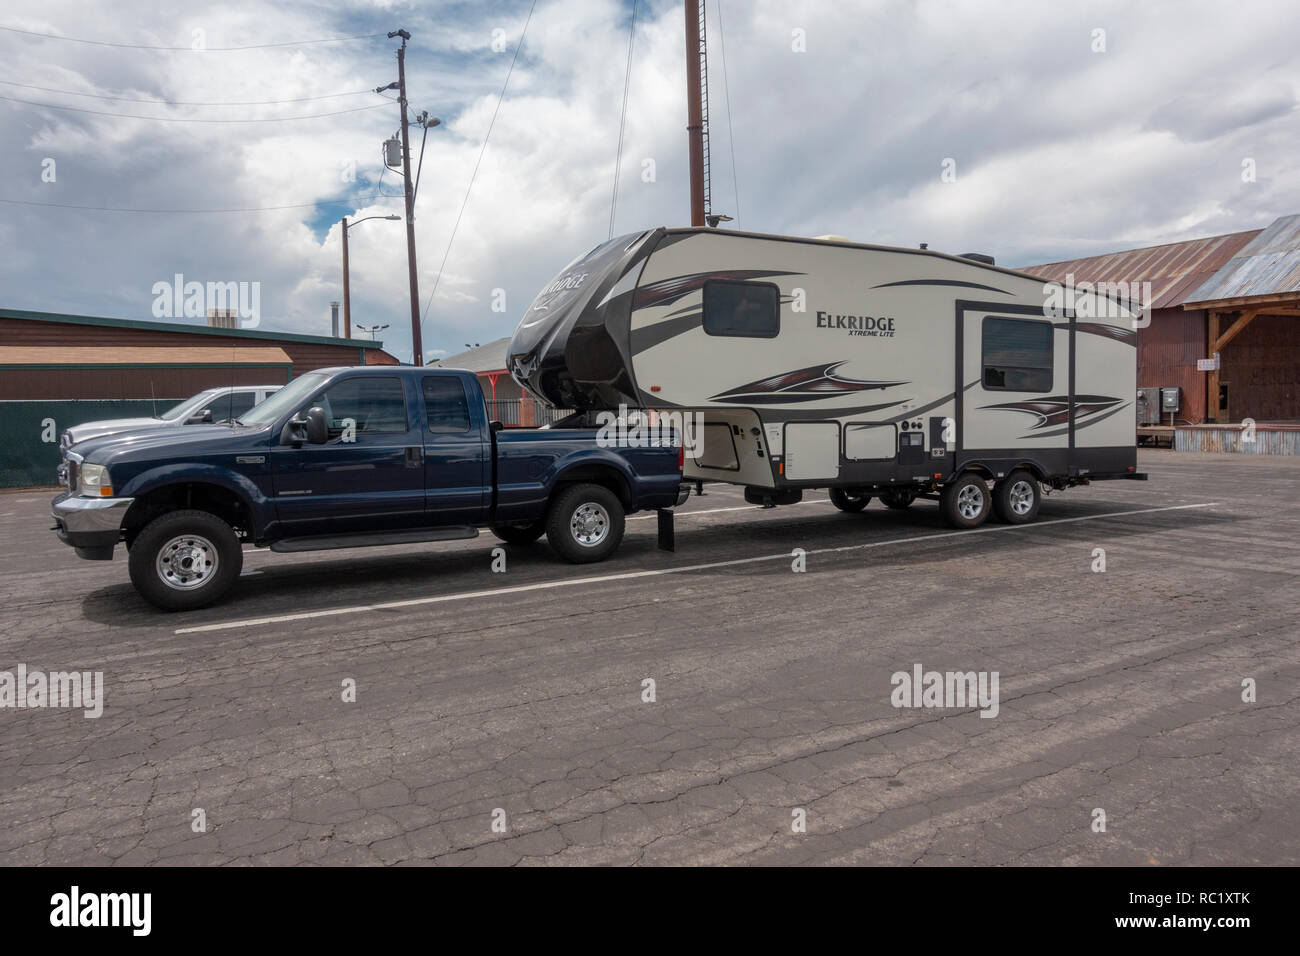 A fifth wheel camper trailer (Elkridge xtreme lite) attached to a Ford Super Duty F250 truck parked in Williams, northern Arizona, USA. Stock Photo